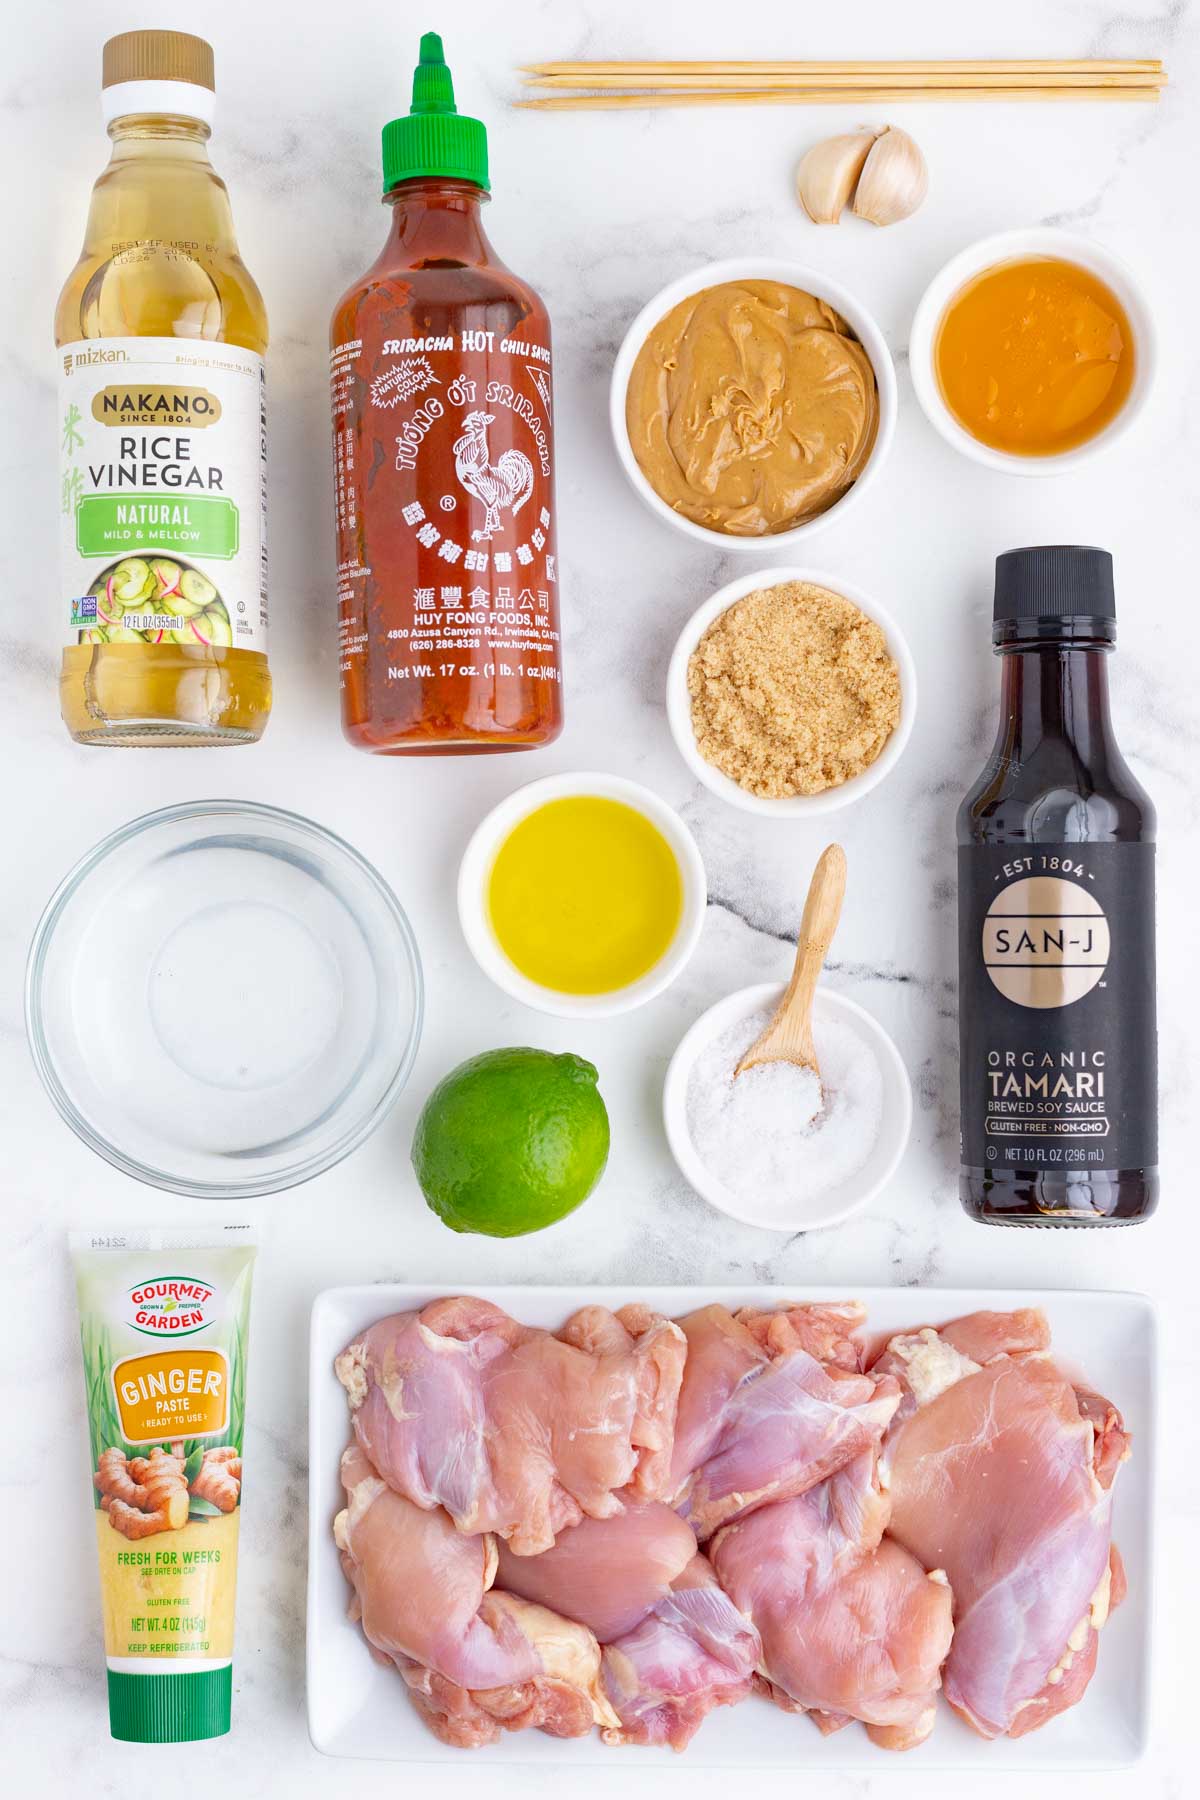 All of the ingredients needed to make Chicken Satay.